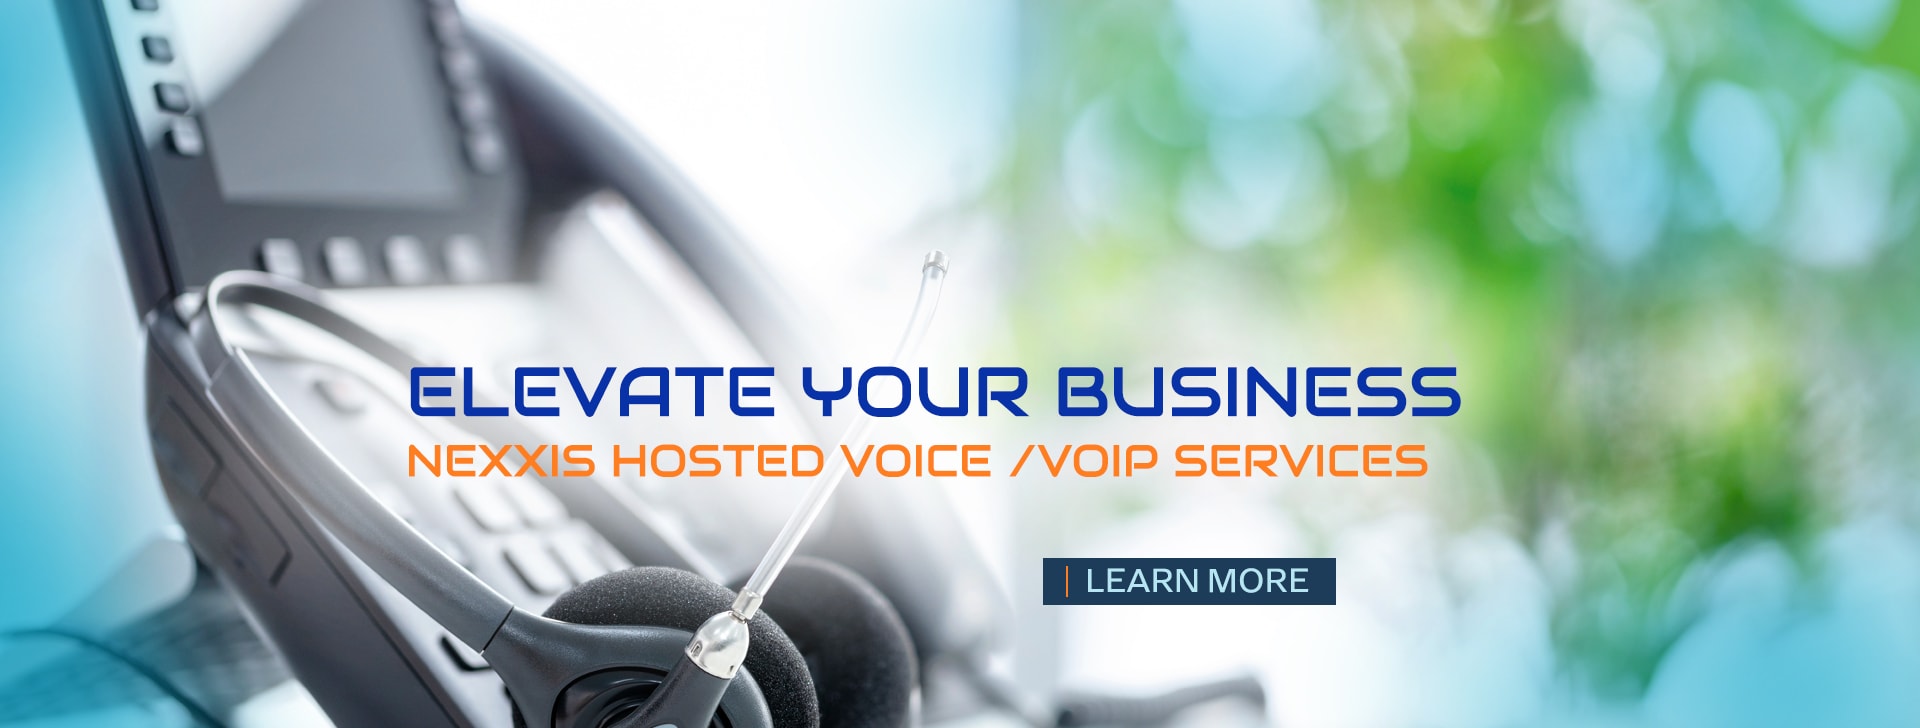 Nexus - Elevate your business with Hosted Voice